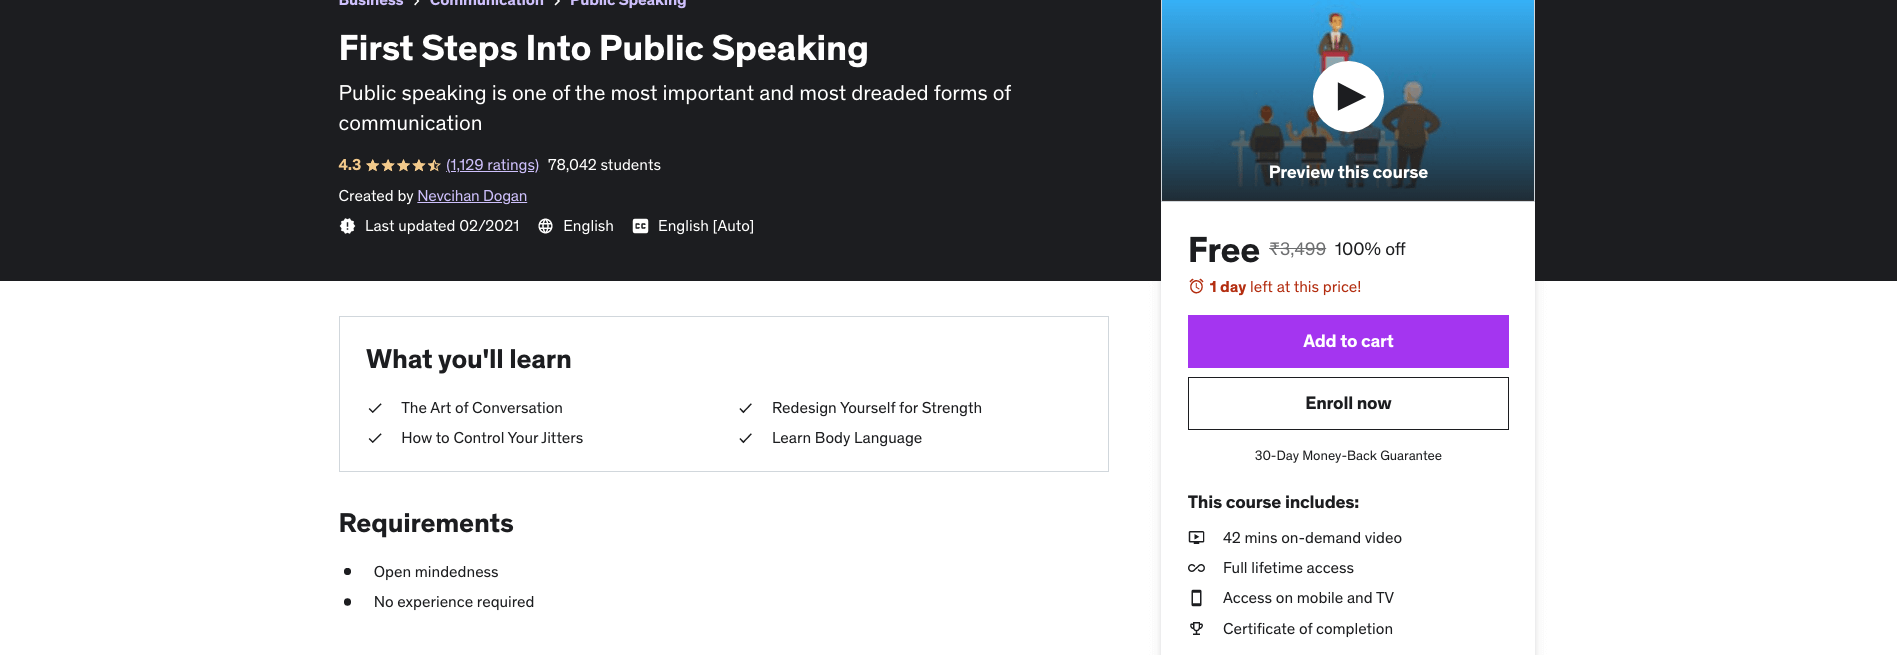 First Steps Into Public Speaking